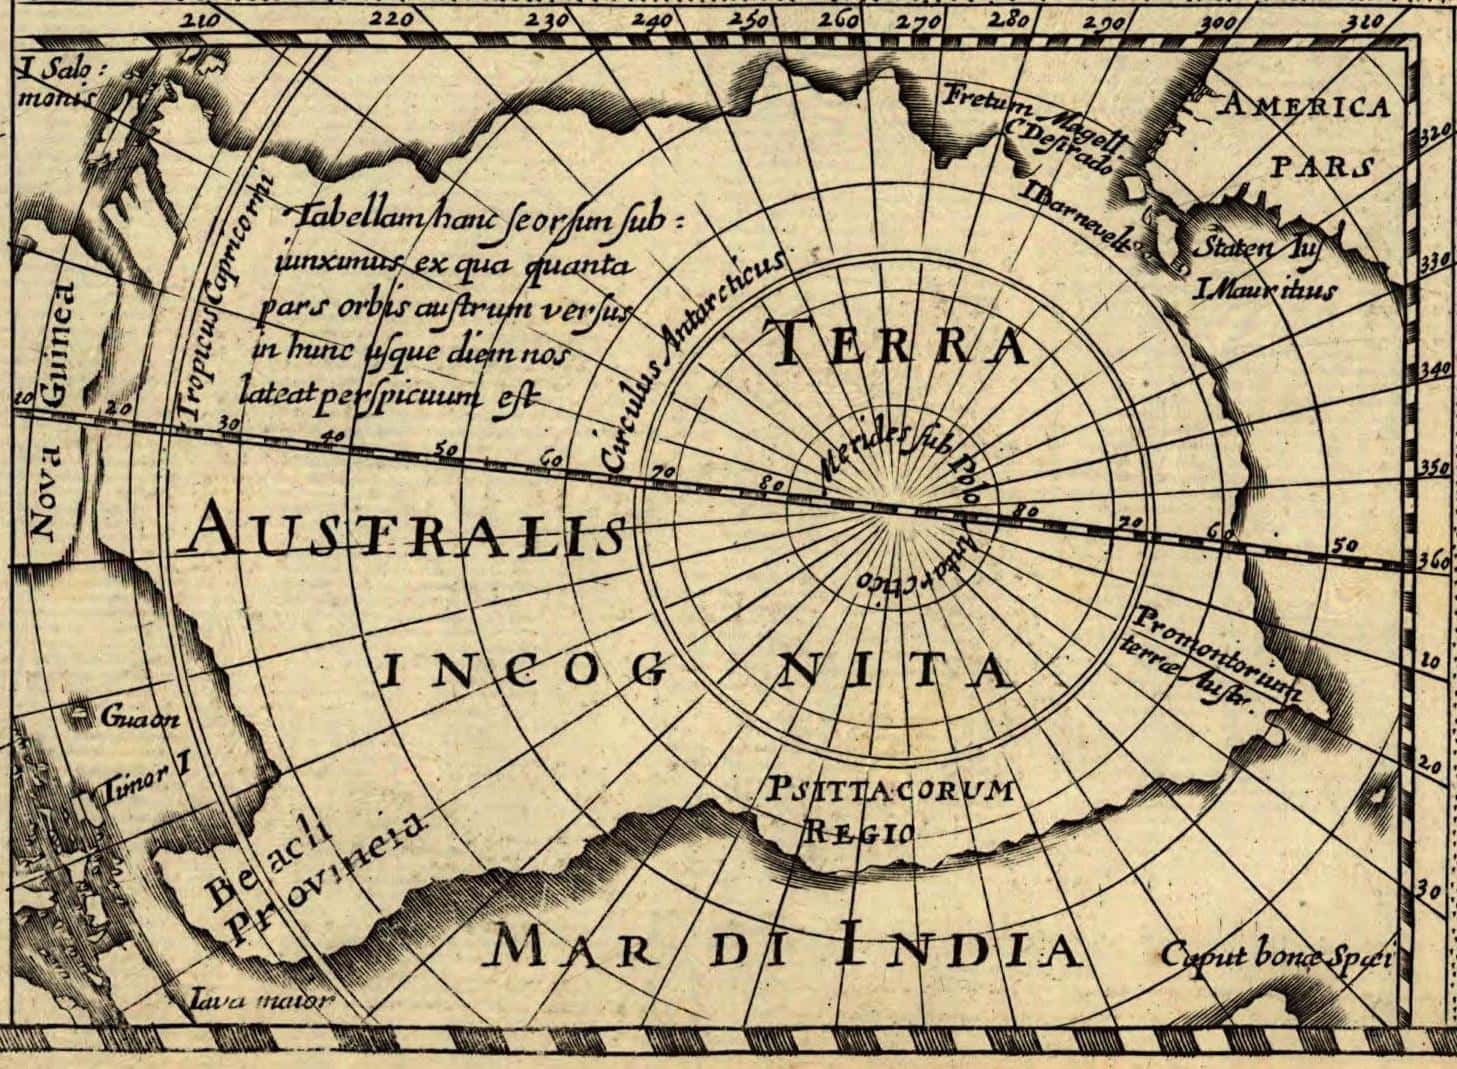 <p>After he made the observation of the Transit of Venus during his first voyage, Cook unsealed the instructions for the next objective of the mission. Cook was tasked with exploring the possibility of the hypothetical <em>Terra Australis, </em>the mythical great Southern Continent.</p>  <p>While Cook may not have found the fabled continent, he did travel along the coastline of New Zealand, becoming the first European to do so. The sojourn to New Zealand produced a very detailed map of the island, with only a few errors. He also became the first European to reach the shore of mainland Australia. In all, Cook’s first major voyage lasted nearly three years.</p>